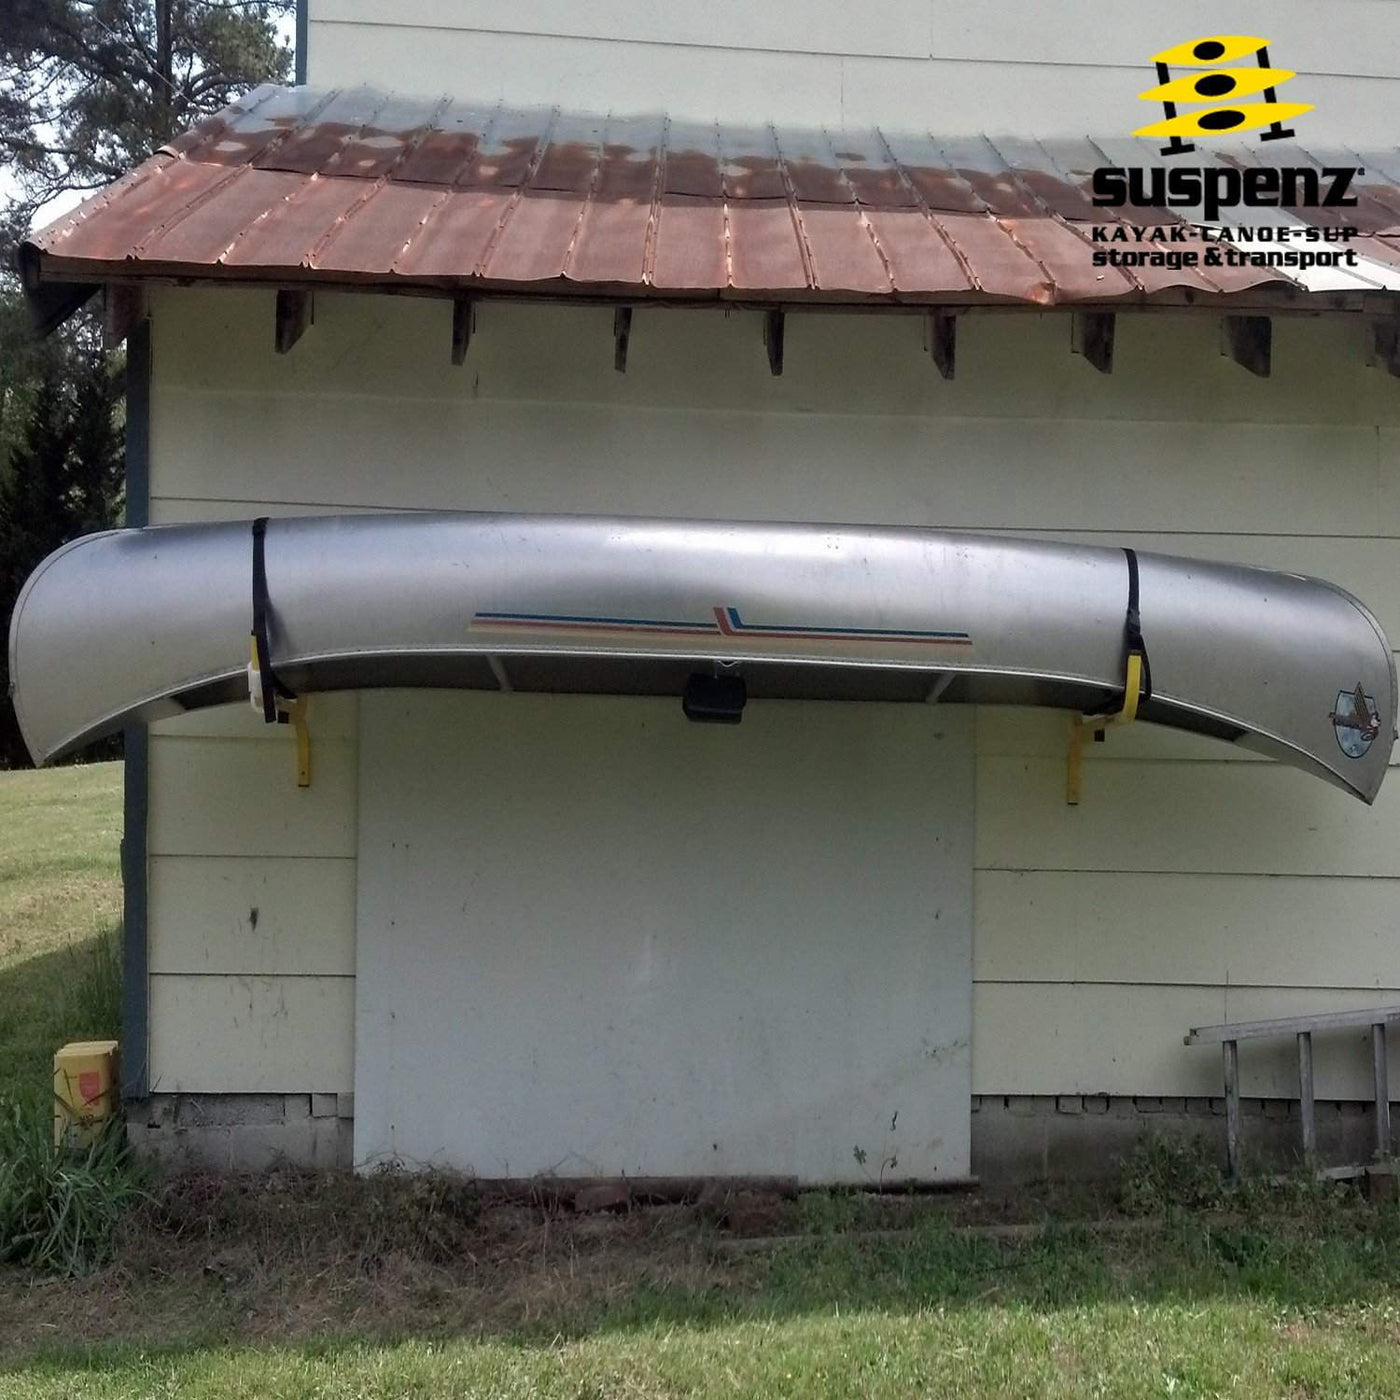 One FLAT Rack and one canoe (stored upside down) mounted to a shed.